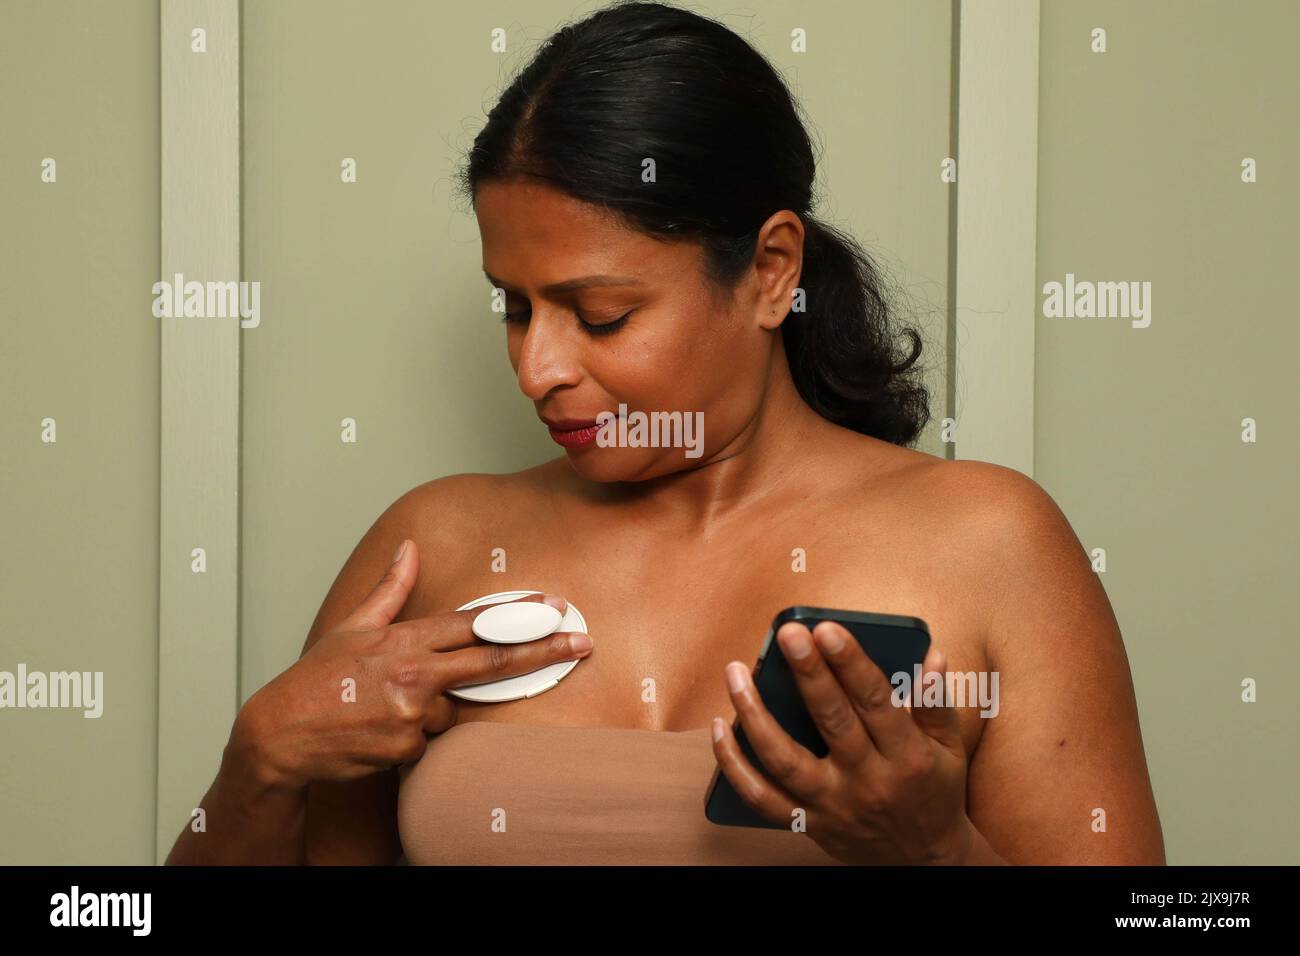 EDITORIAL USE ONLY Participants try out Dotplot, a device designed by Debra Babalola and Shefali Bohra to assist women in performing monthly breast self-checks, which has been announced as the winner of the UK James Dyson Award 2022. sue date: Wednesday September 7, 2022. Stock Photo